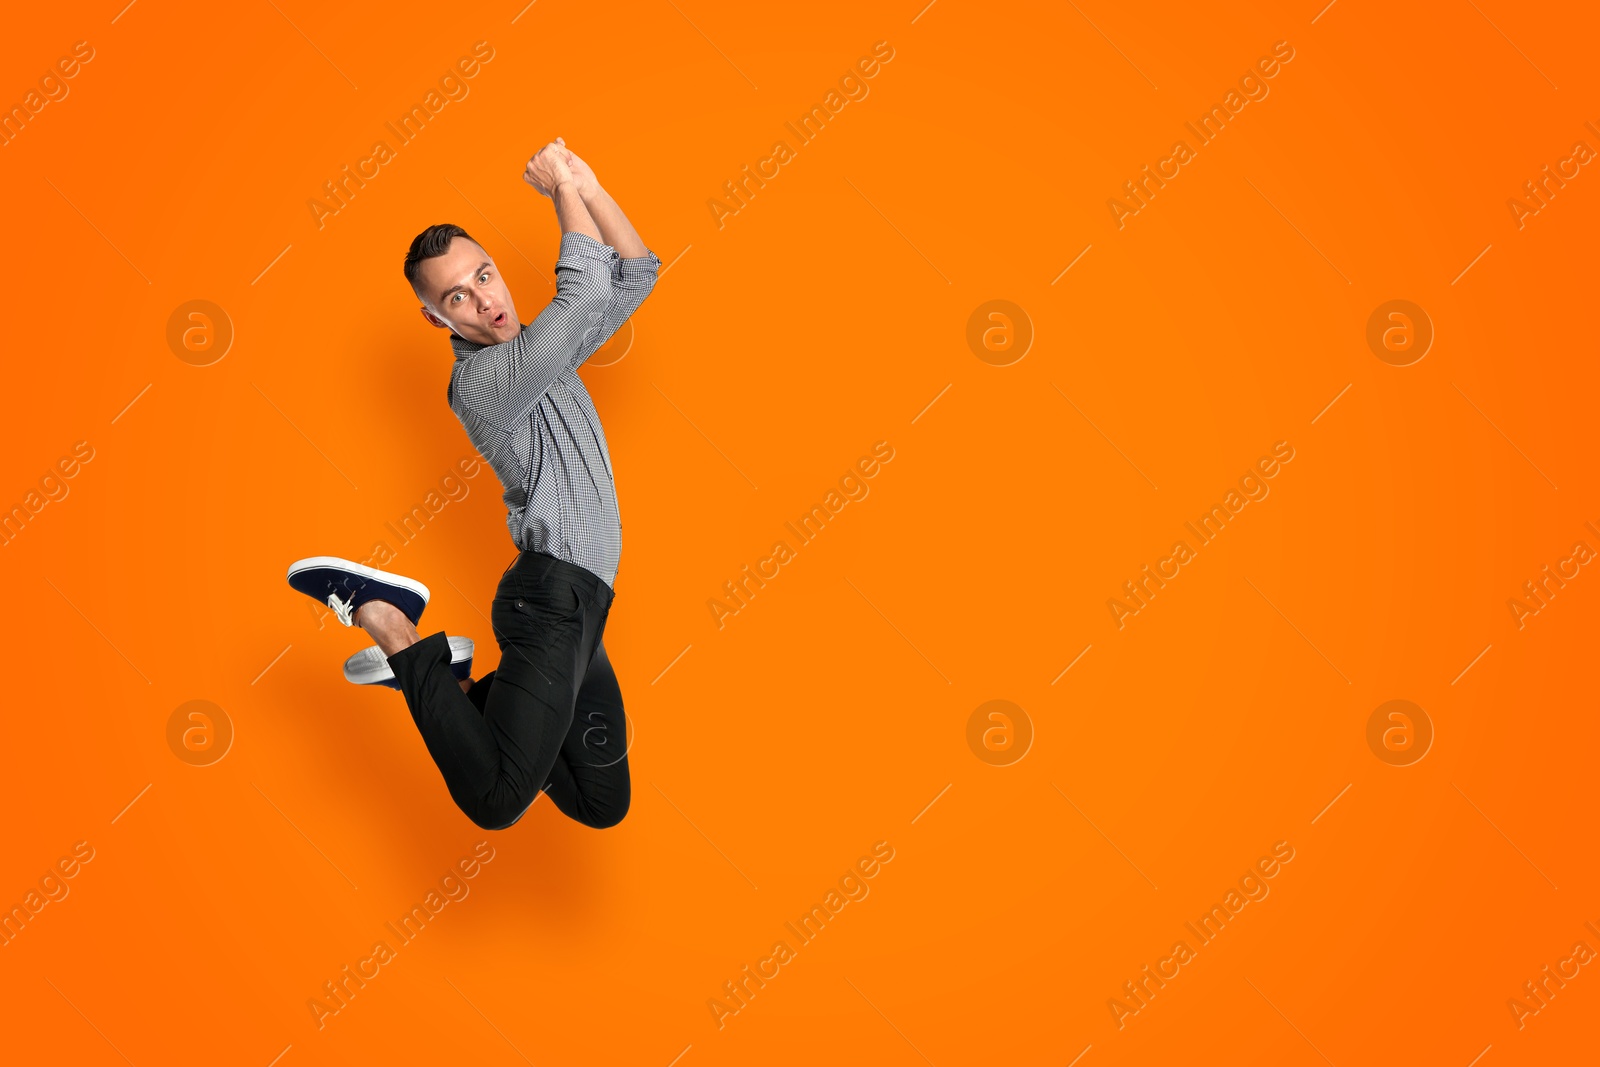 Image of Positive young man jumping on orange background. Space for text